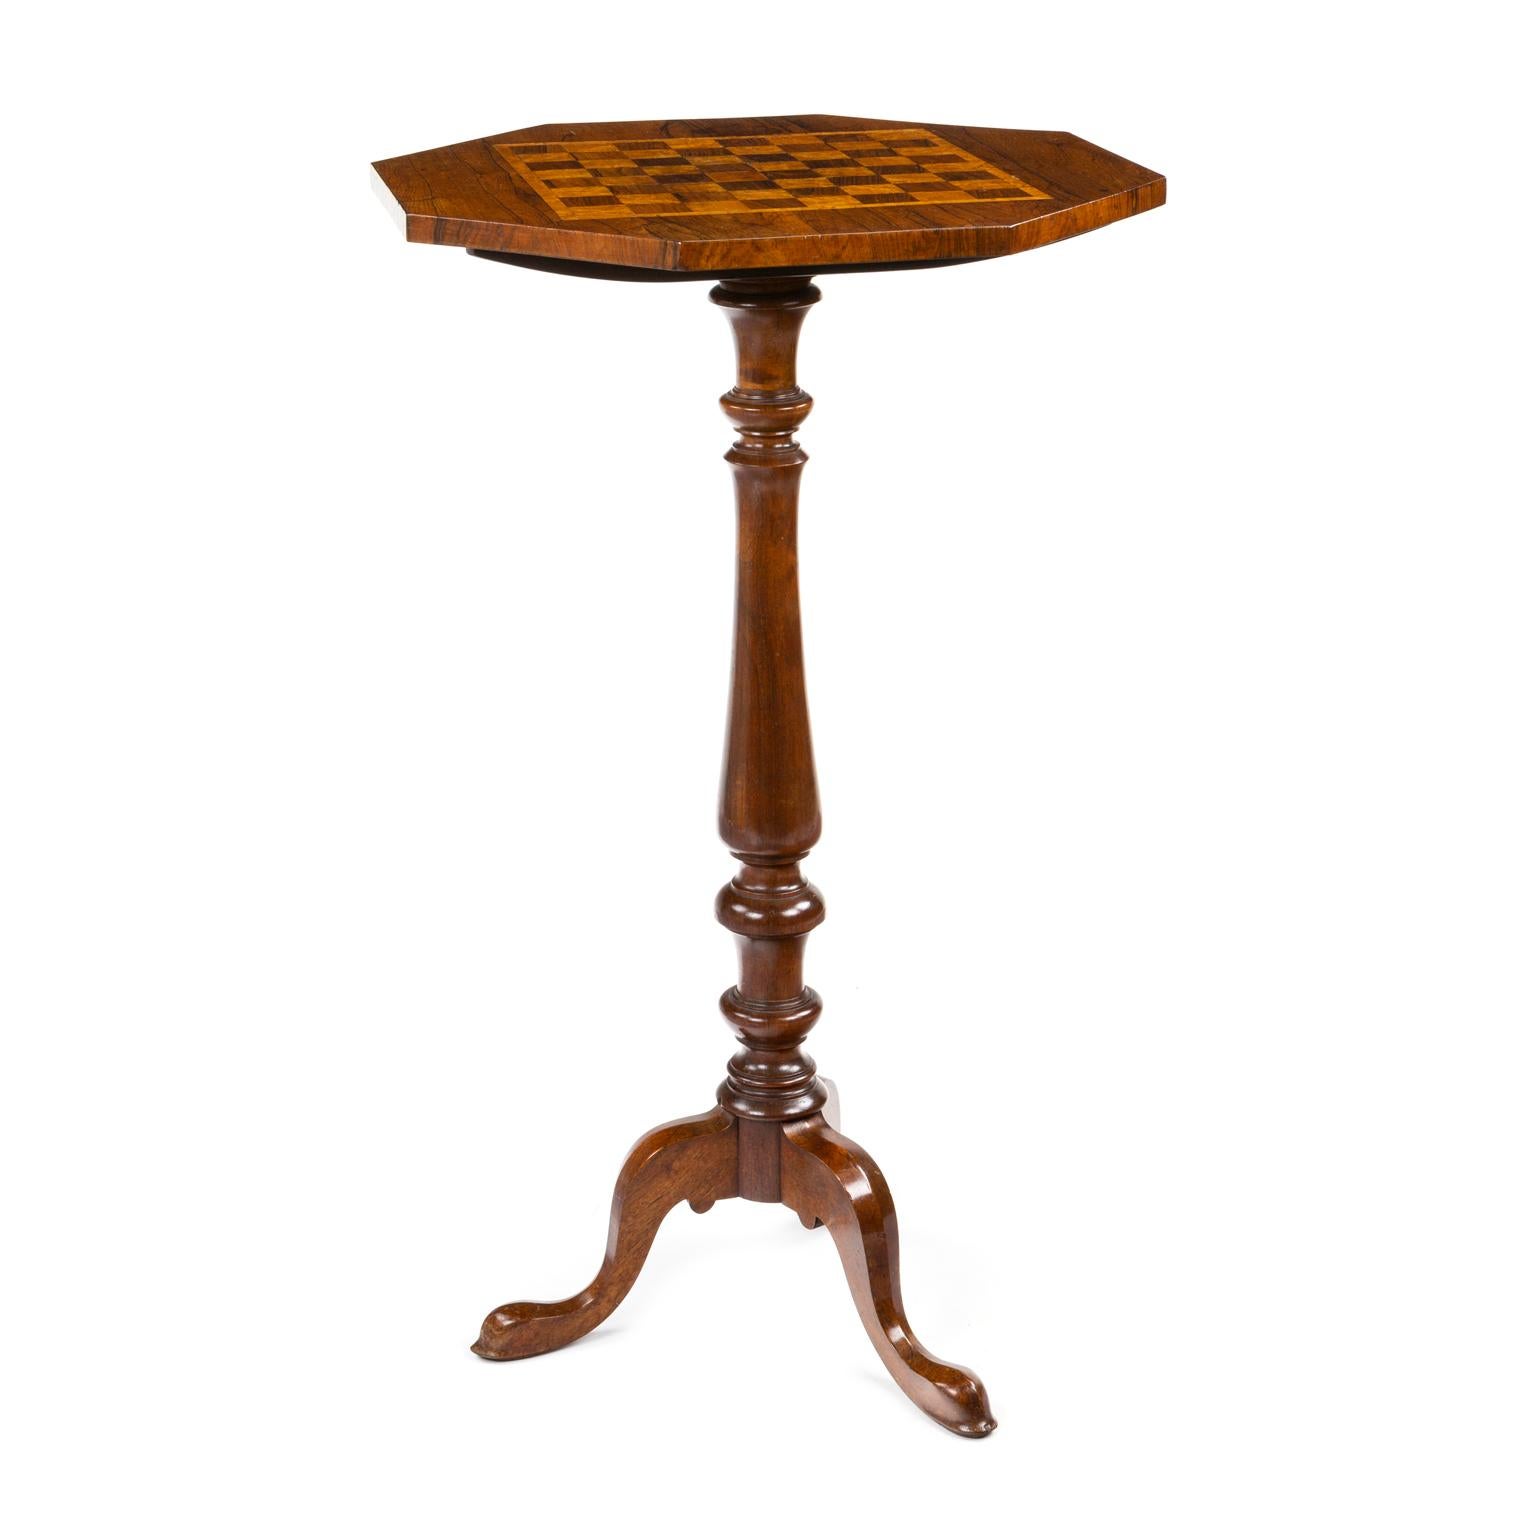 A fine Regency chess table, dating to approximately 1800, attributed to Gillows of London and Lancashire. The table is made from rosewood with bear yew panels and stringing to form the playing surface.

Gillows of Lancaster and London, also known